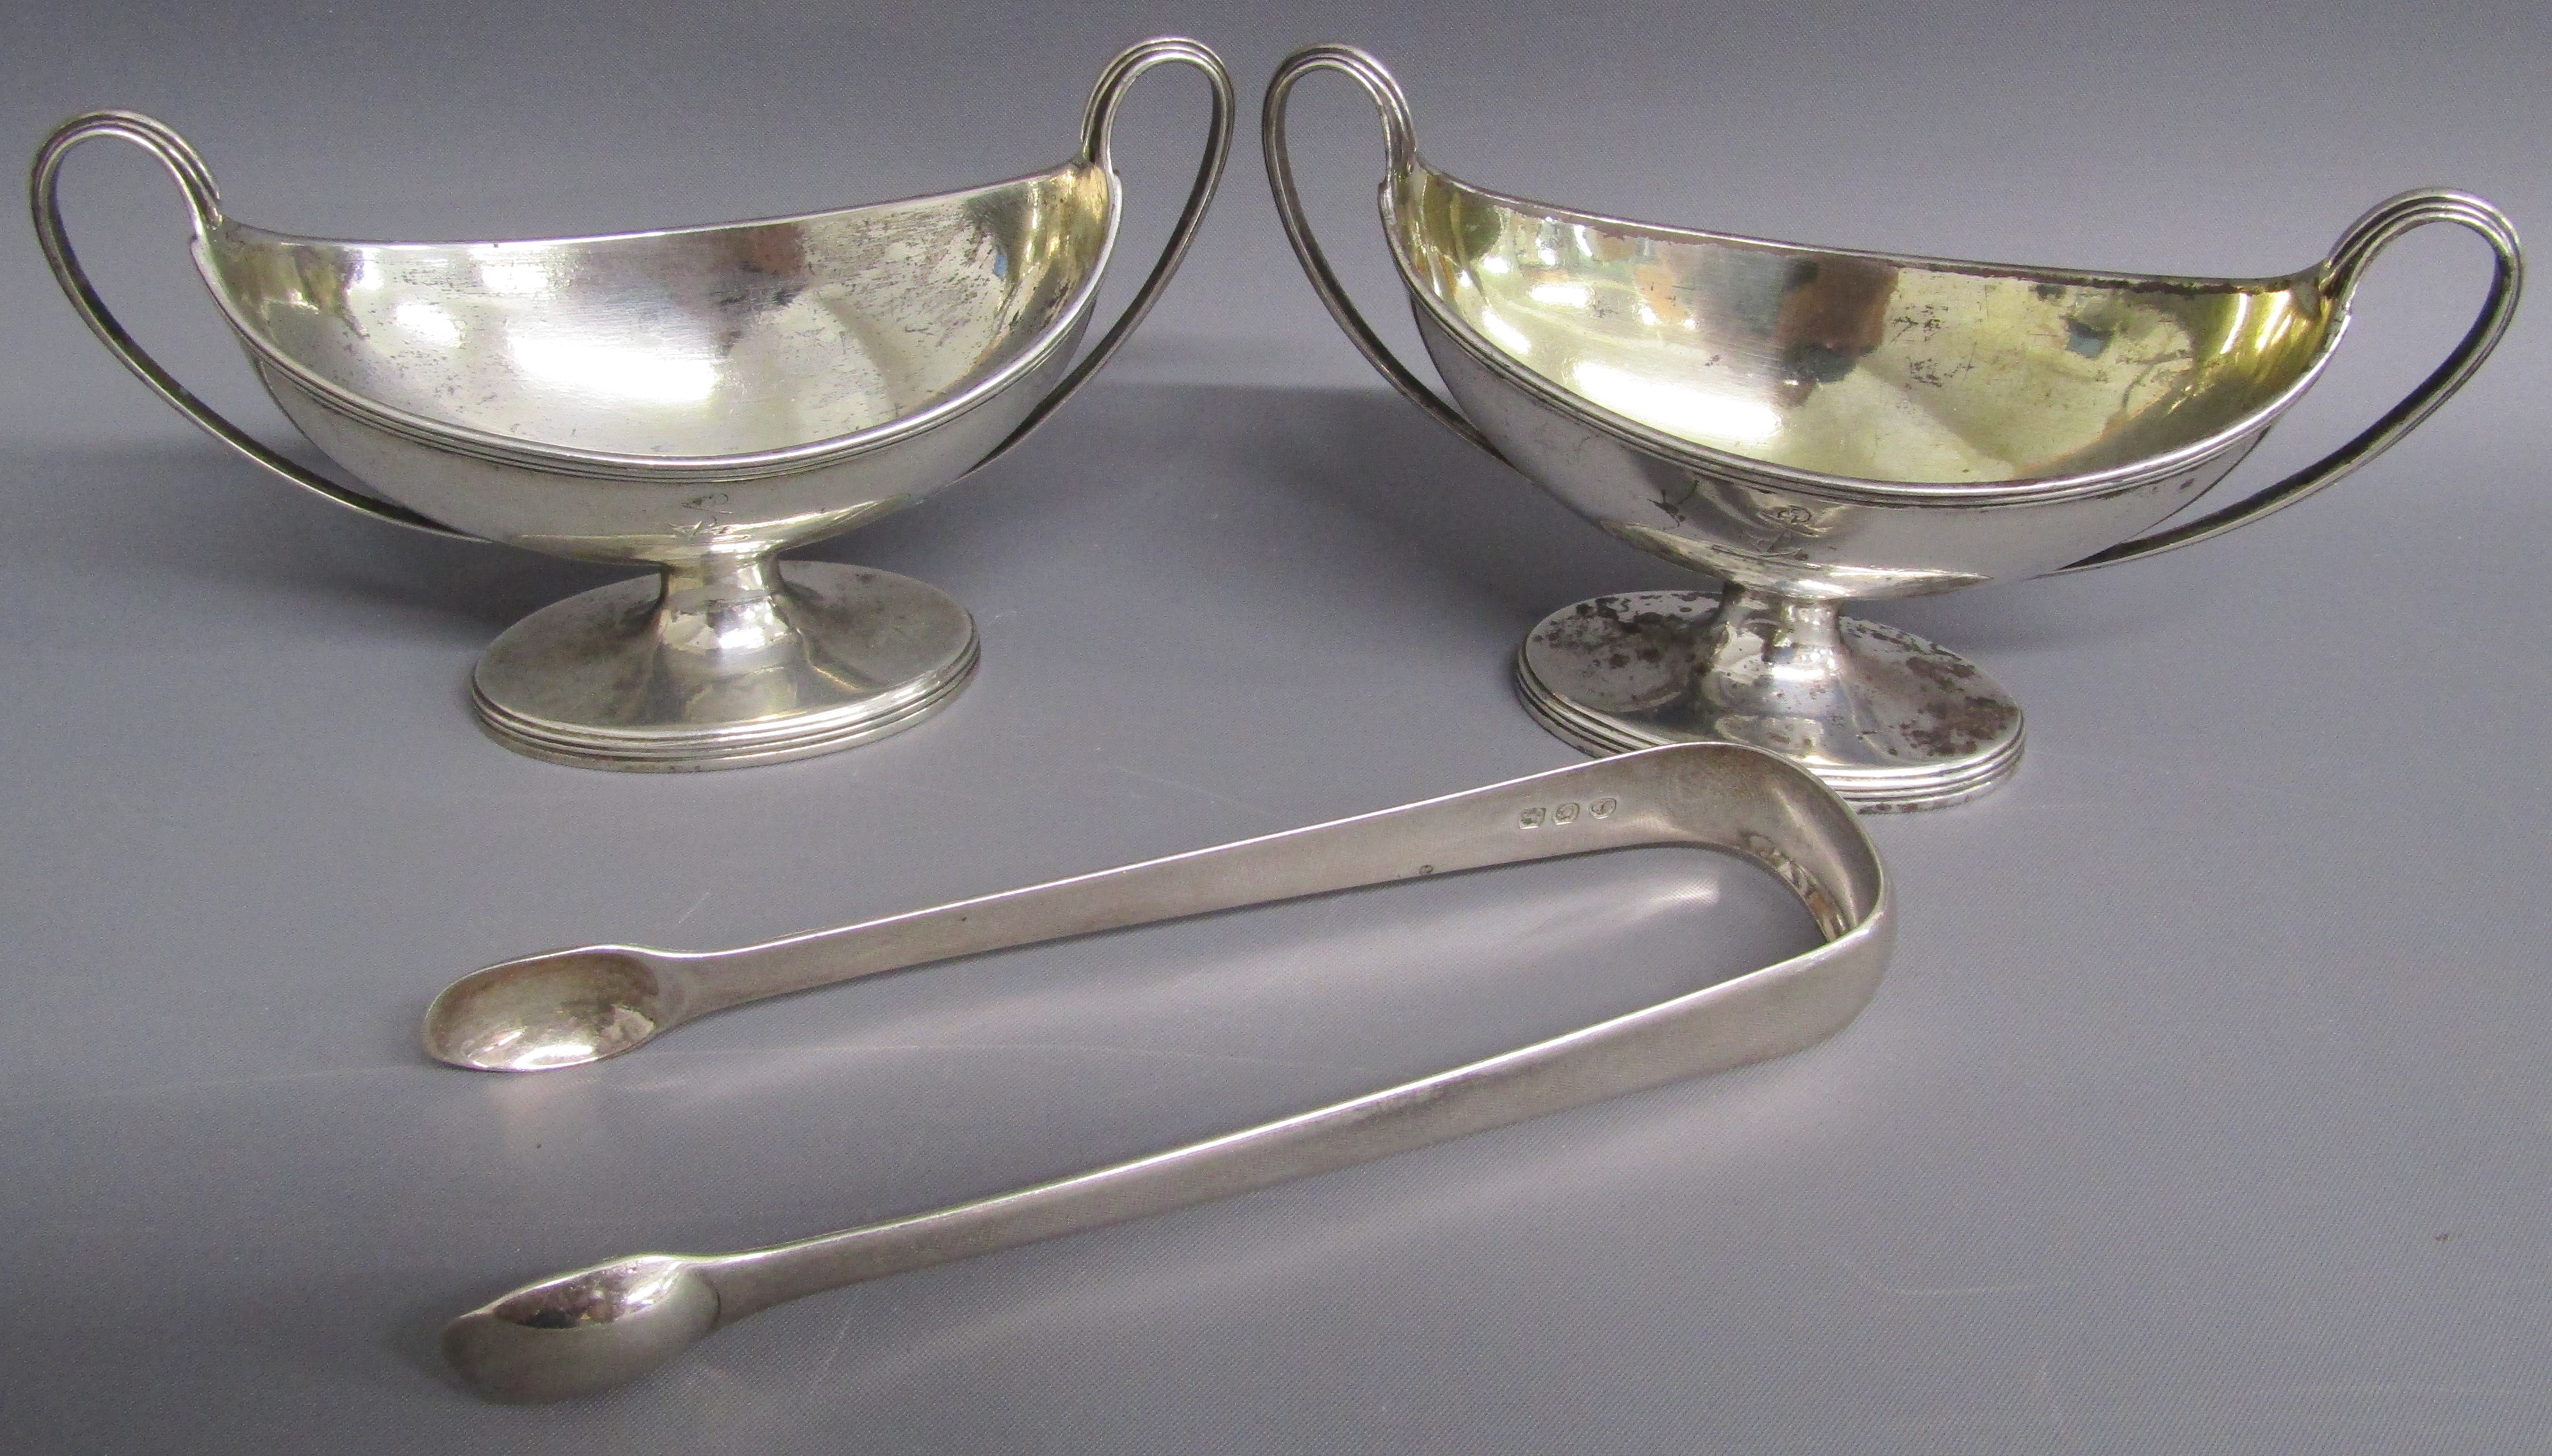 Possibly Henry Chawner London 1792 silver twin handled sauce dishes with anchor monogram and William